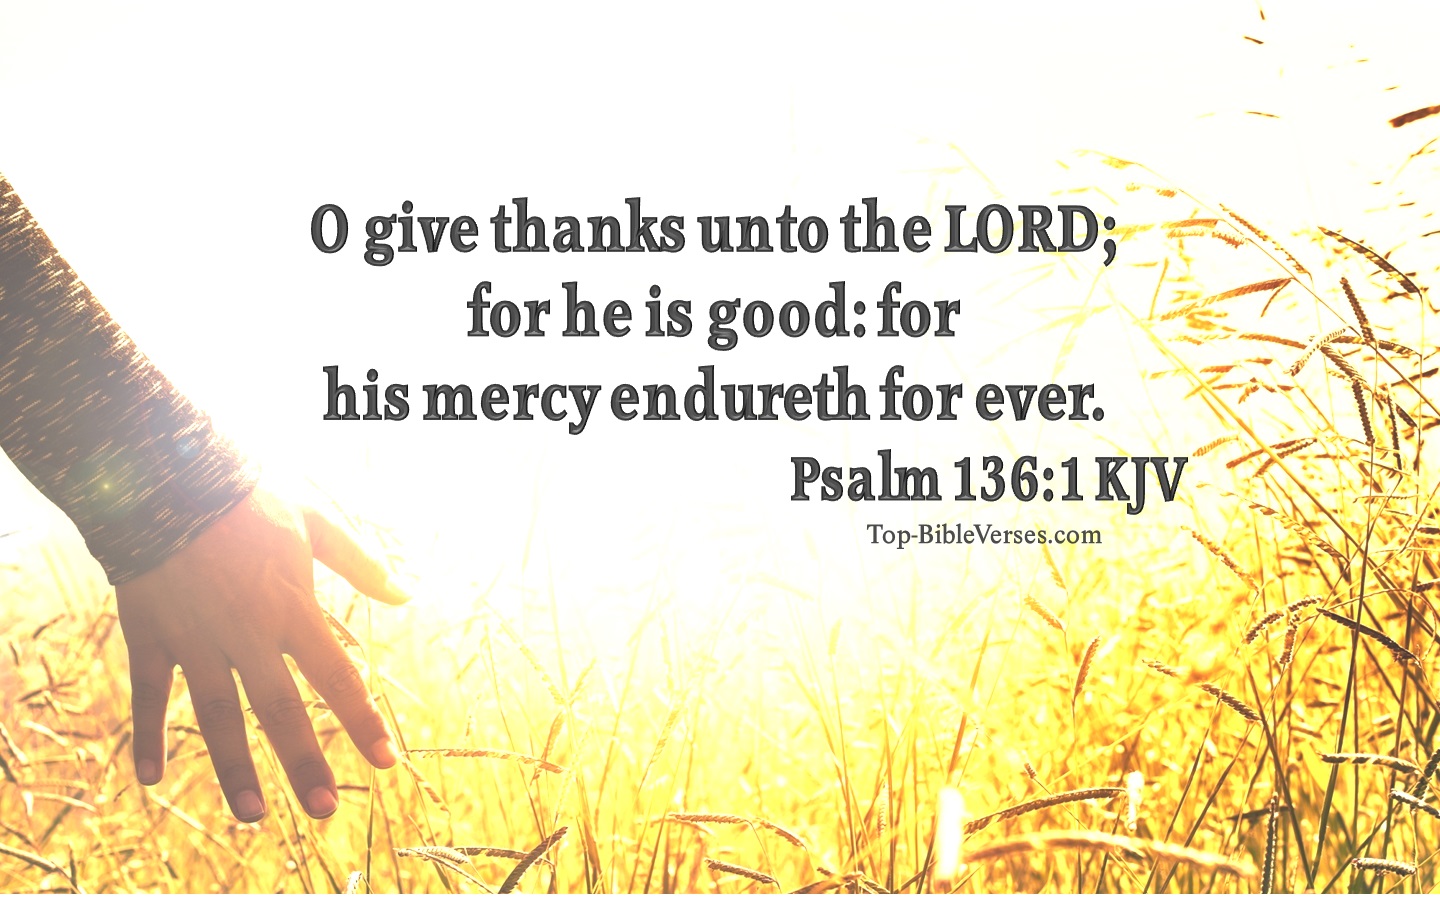 Psalm-136-1-O-give-thanks-unto-the-LORD-for-he-is-good-5.jpg